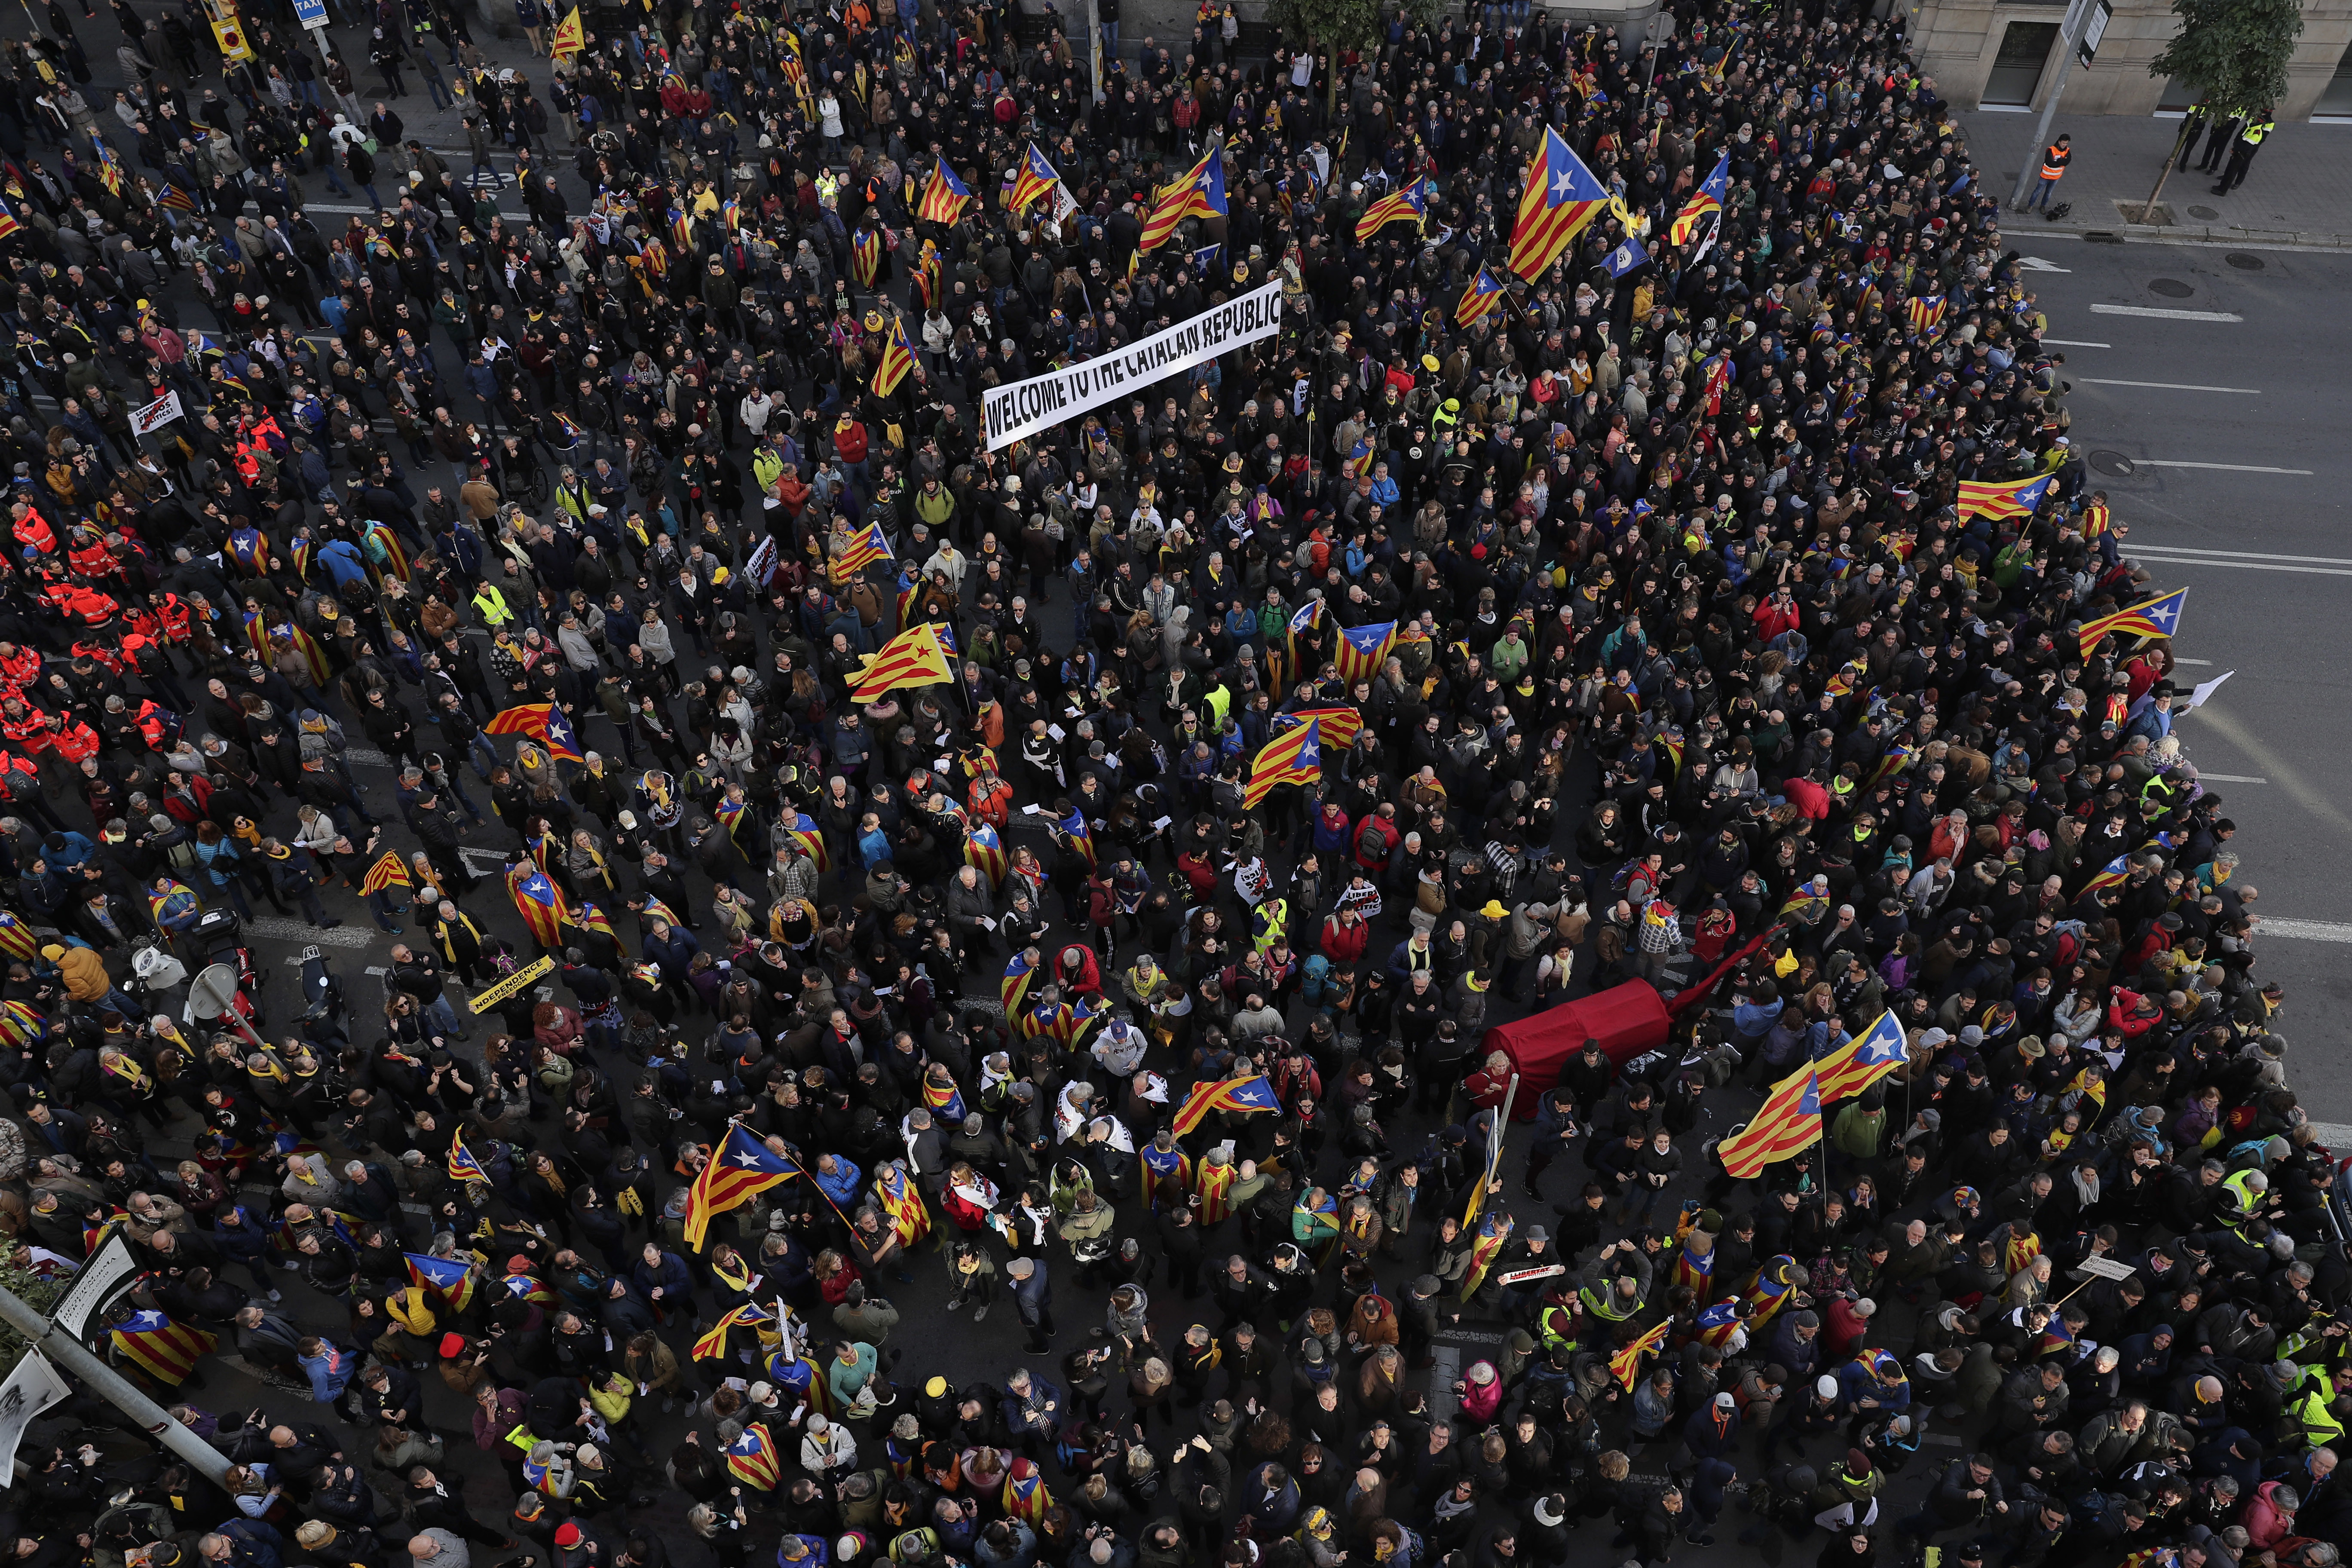 Protesters, some with Catalonia independence flags, demonstrate against Spain's cabinet holding a meeting in Barcelona Spain, Friday Dec. 21, 2018. Some scuffles have broken out between protesters trying to reach the venue of the cabinet meeting and police trying to stop them on Friday in central Barcelona after pro-independence organizations called for peaceful demonstrations against the meeting across the city. (AP Photo/Manu Fernandez)